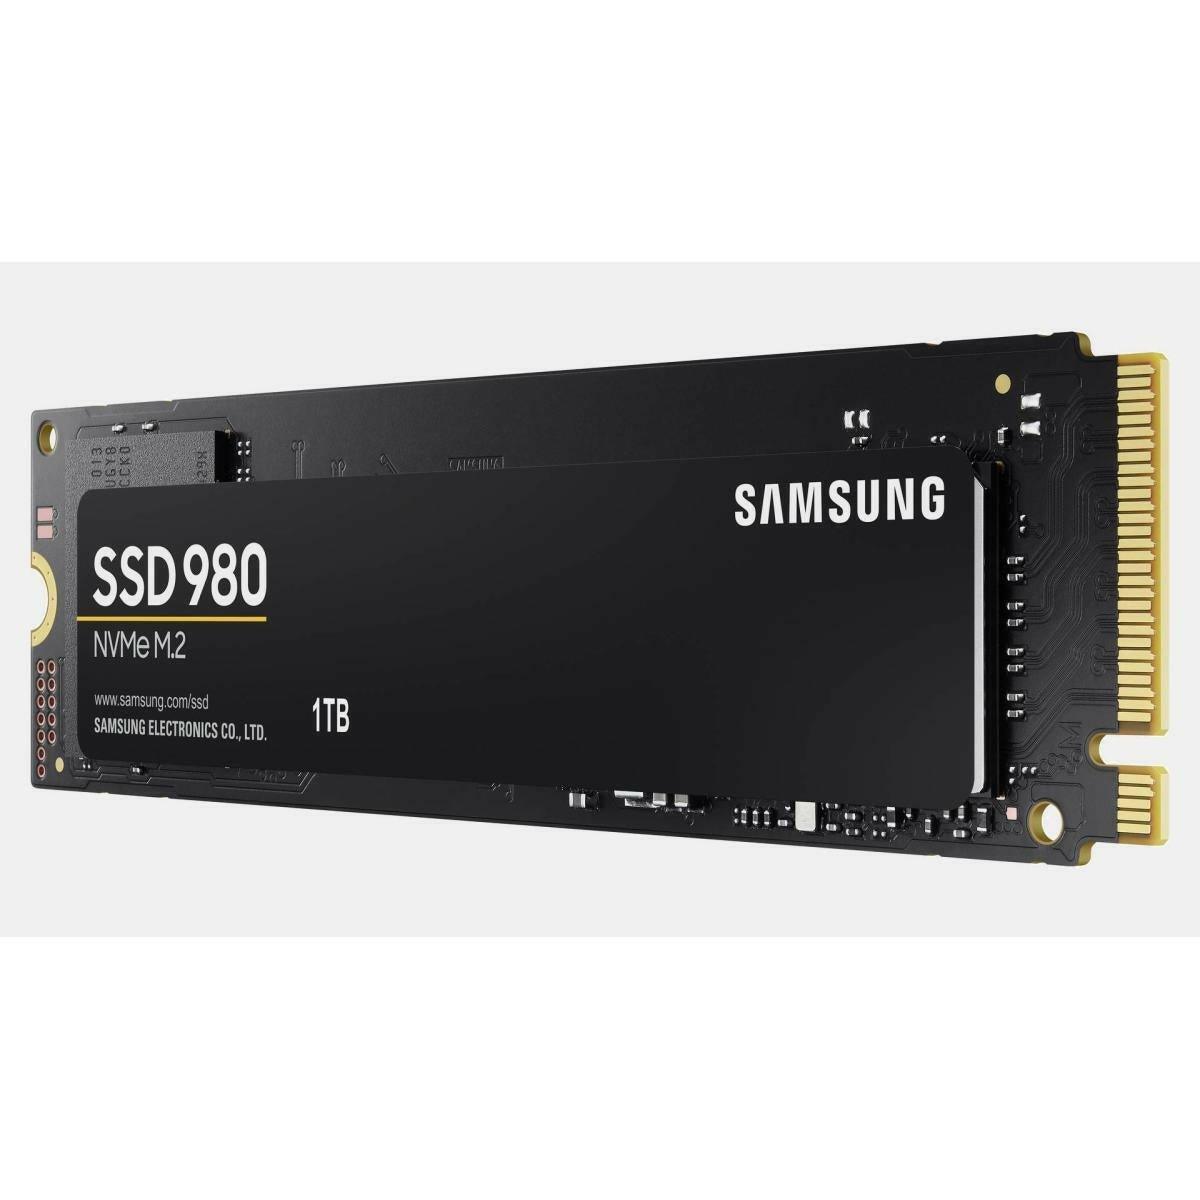 SAMSUNG Solid State Drive SAMSUNG 980 SSD 1TB PCIe3.0 M.2 NVMe Read/Write Up To 3,500/3,000 MB/s